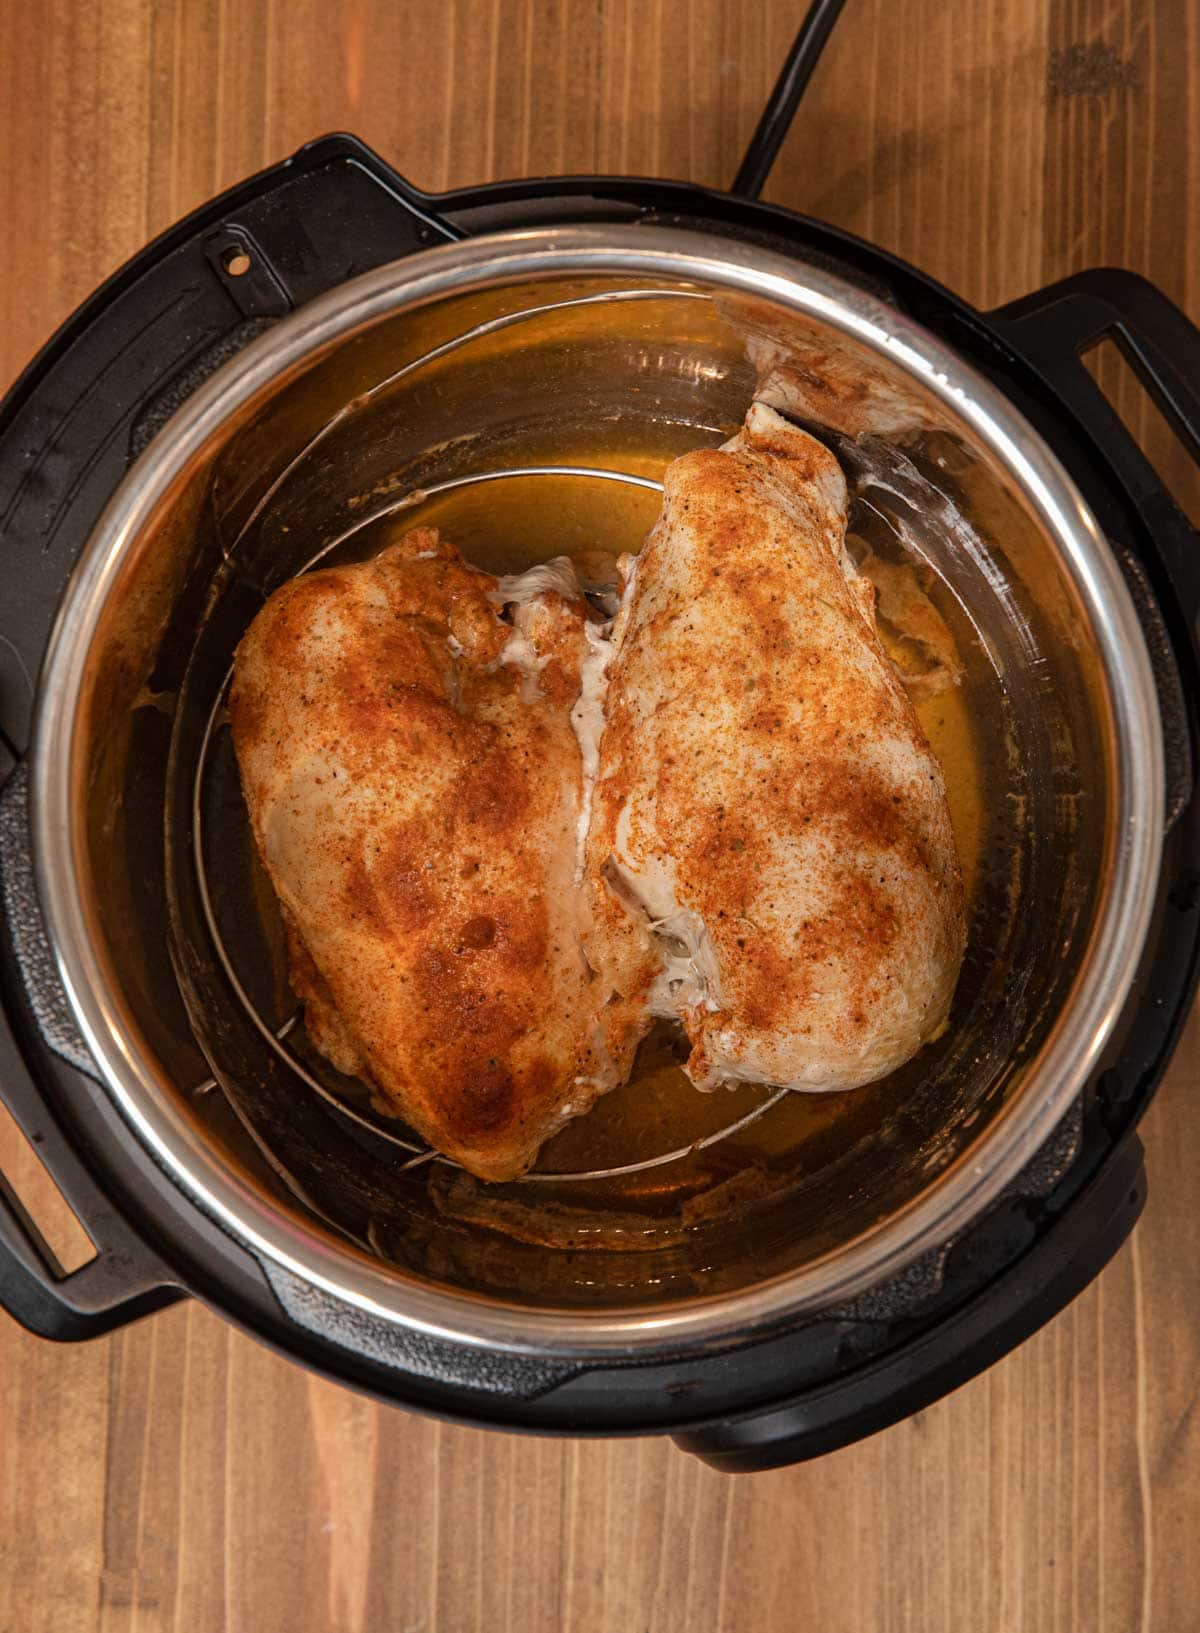 How Long Do You Cook Boneless Chicken Breast In An Electric Pressure Cooker